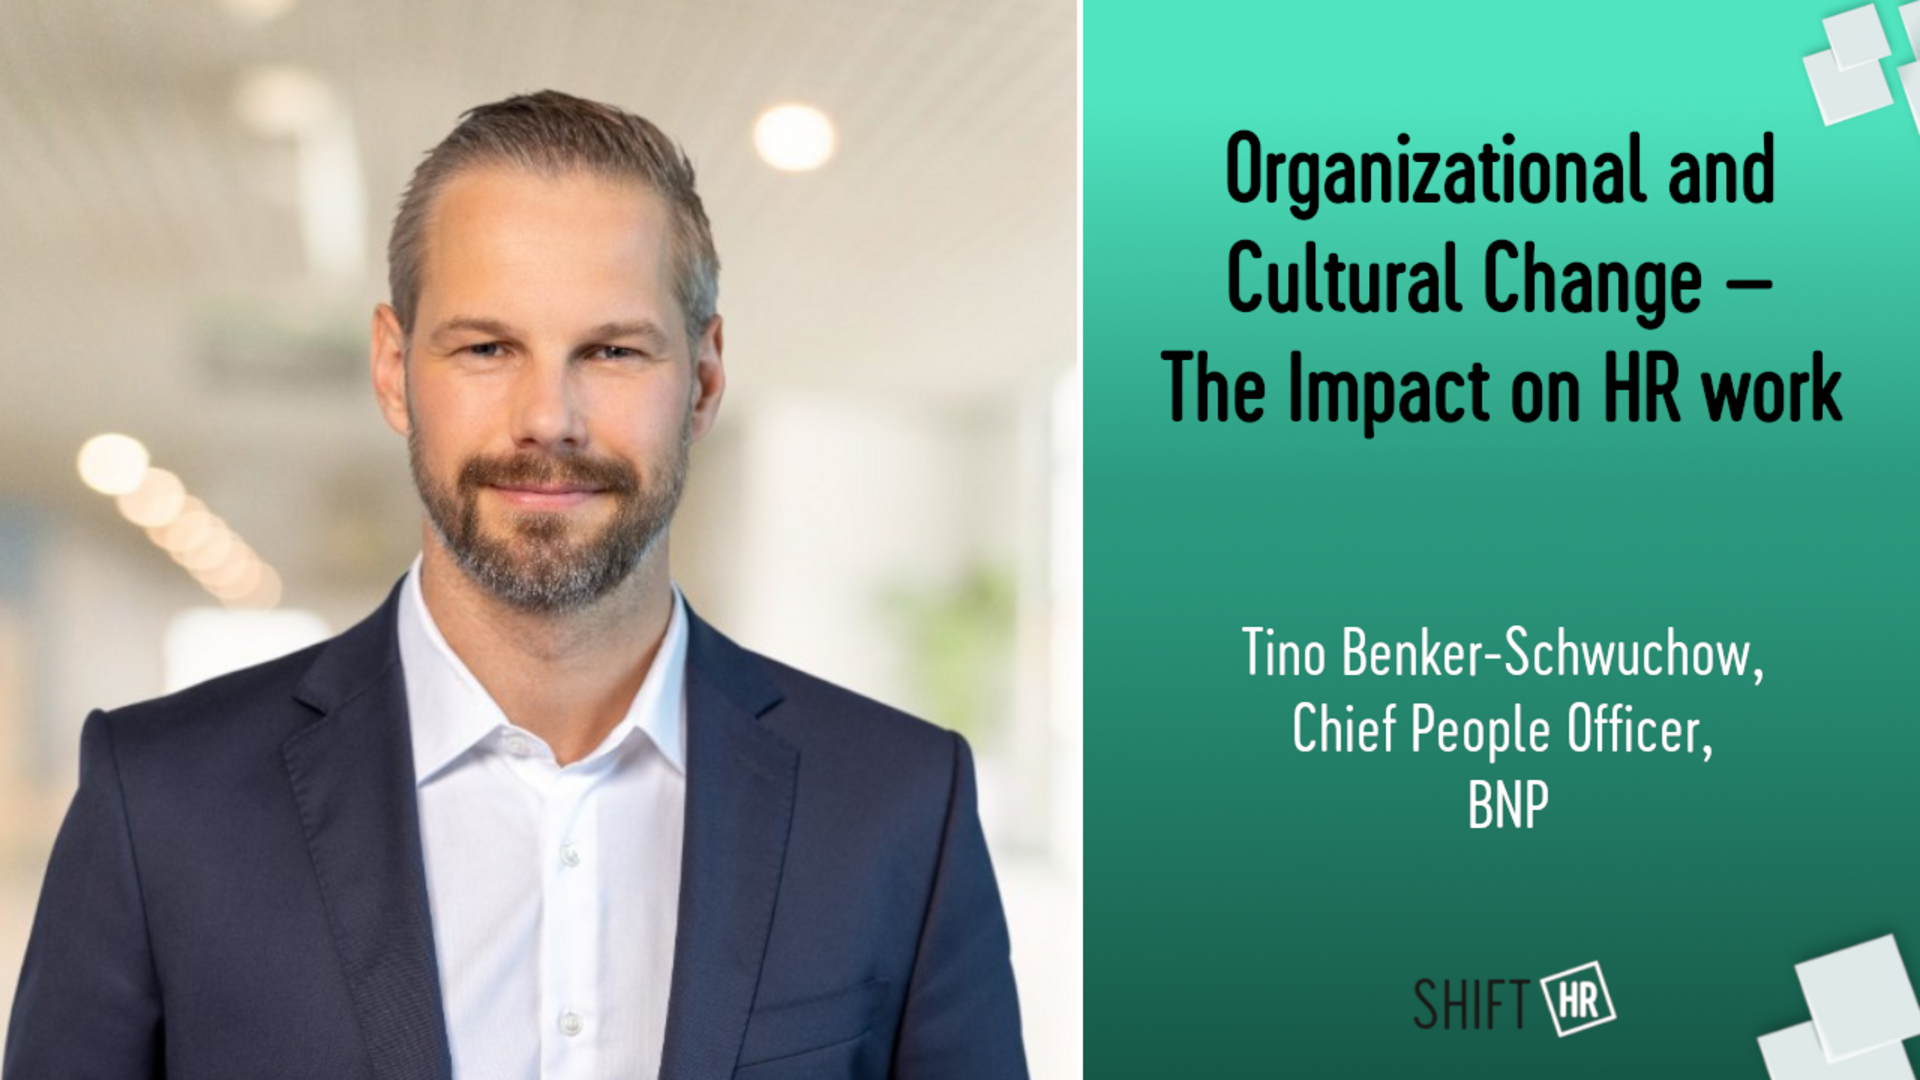 Organizational and Cultural Change – The Impact on HR work